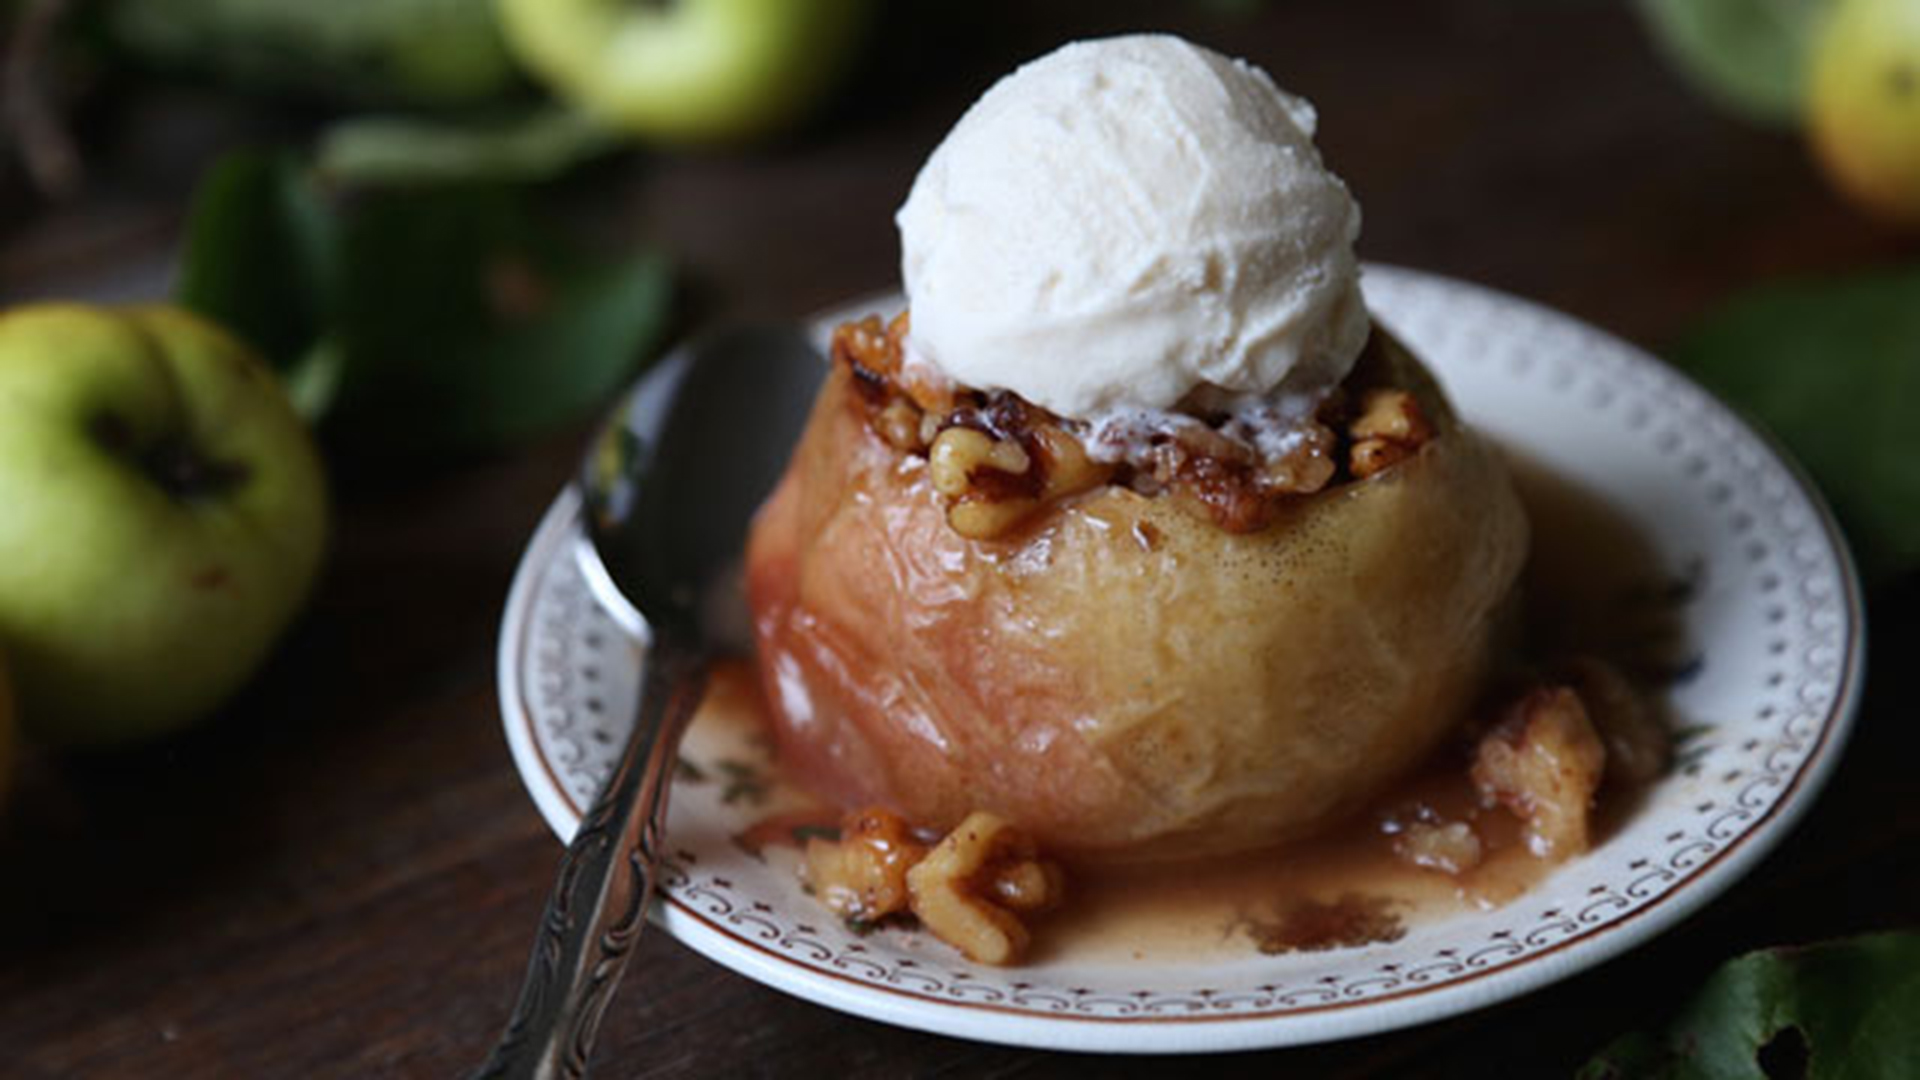 Baked apple topped with whipped cream